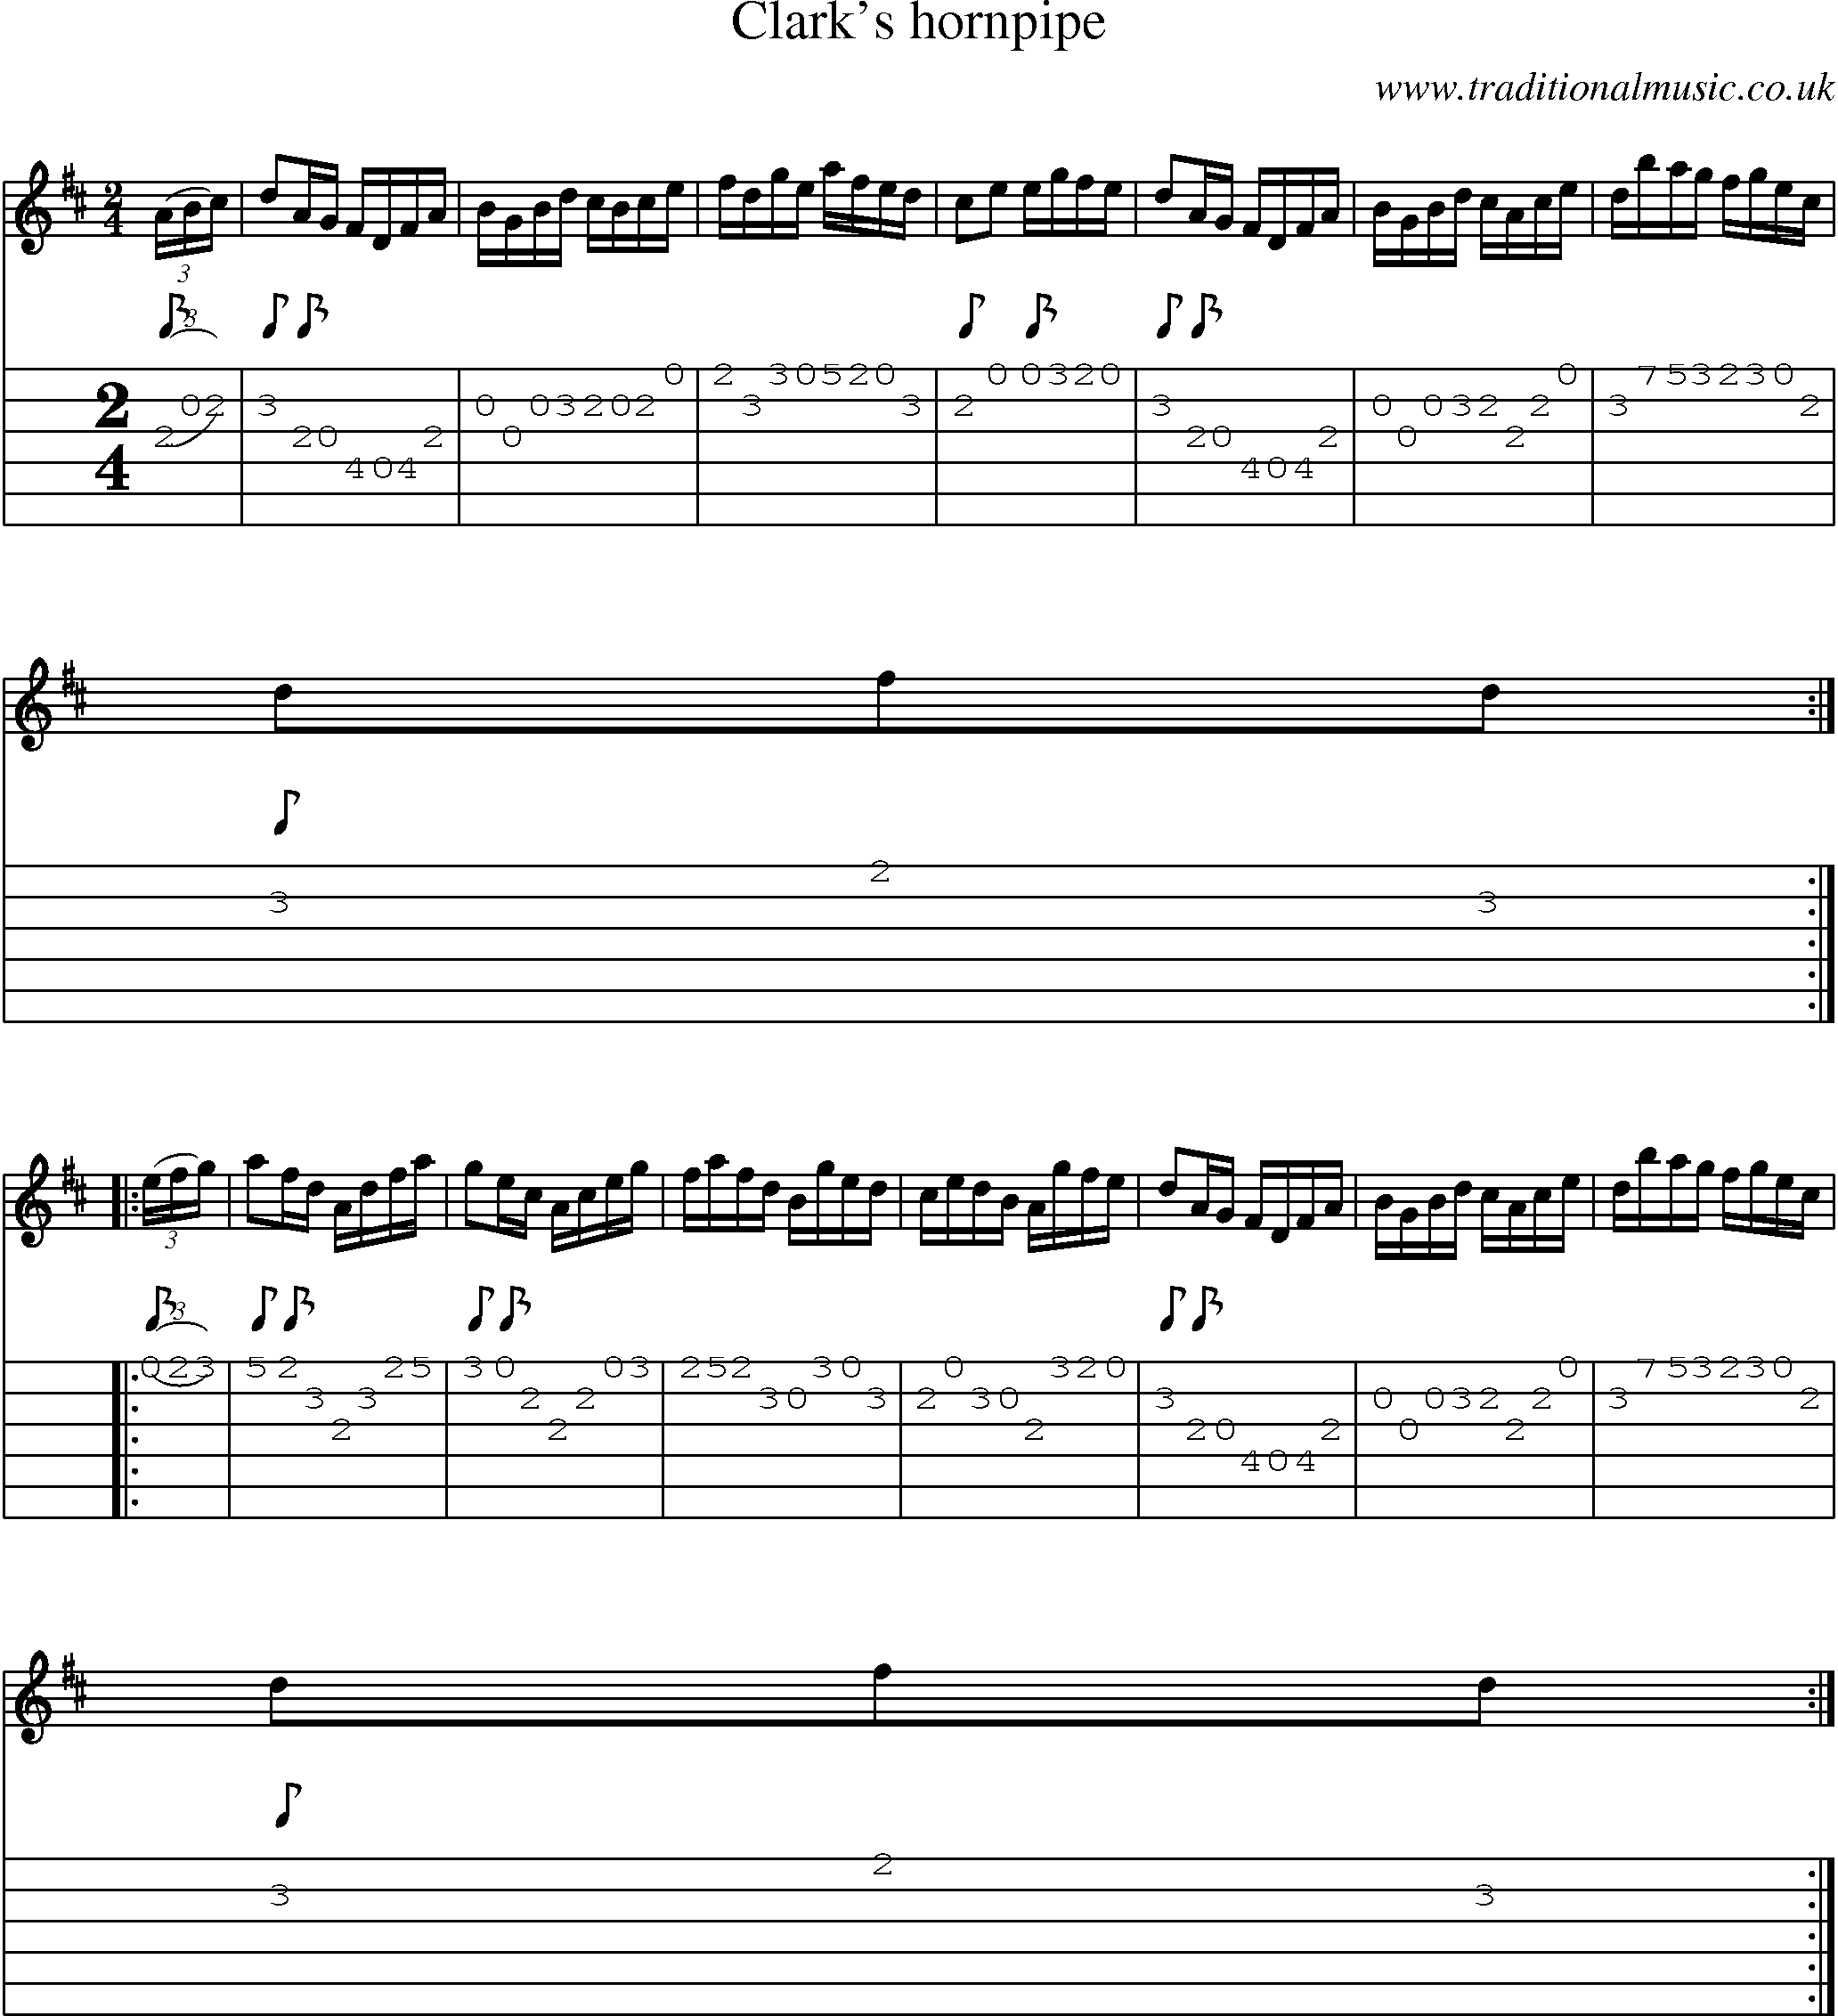 Music Score and Guitar Tabs for Clarks Hornpipe